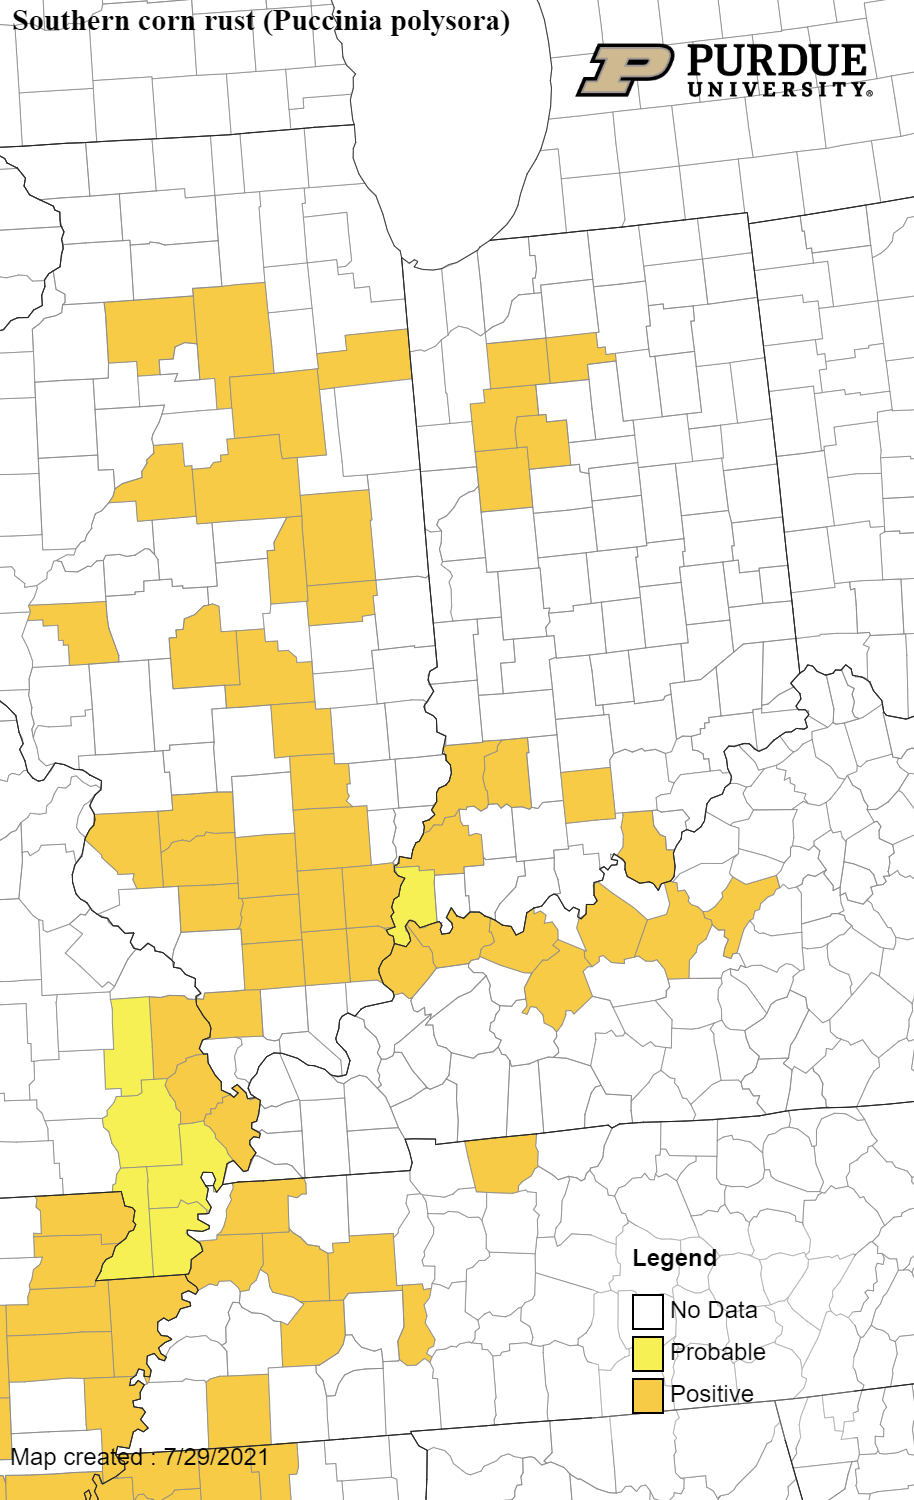 Figure 4. Southern corn rust map for July 29, 2021. 